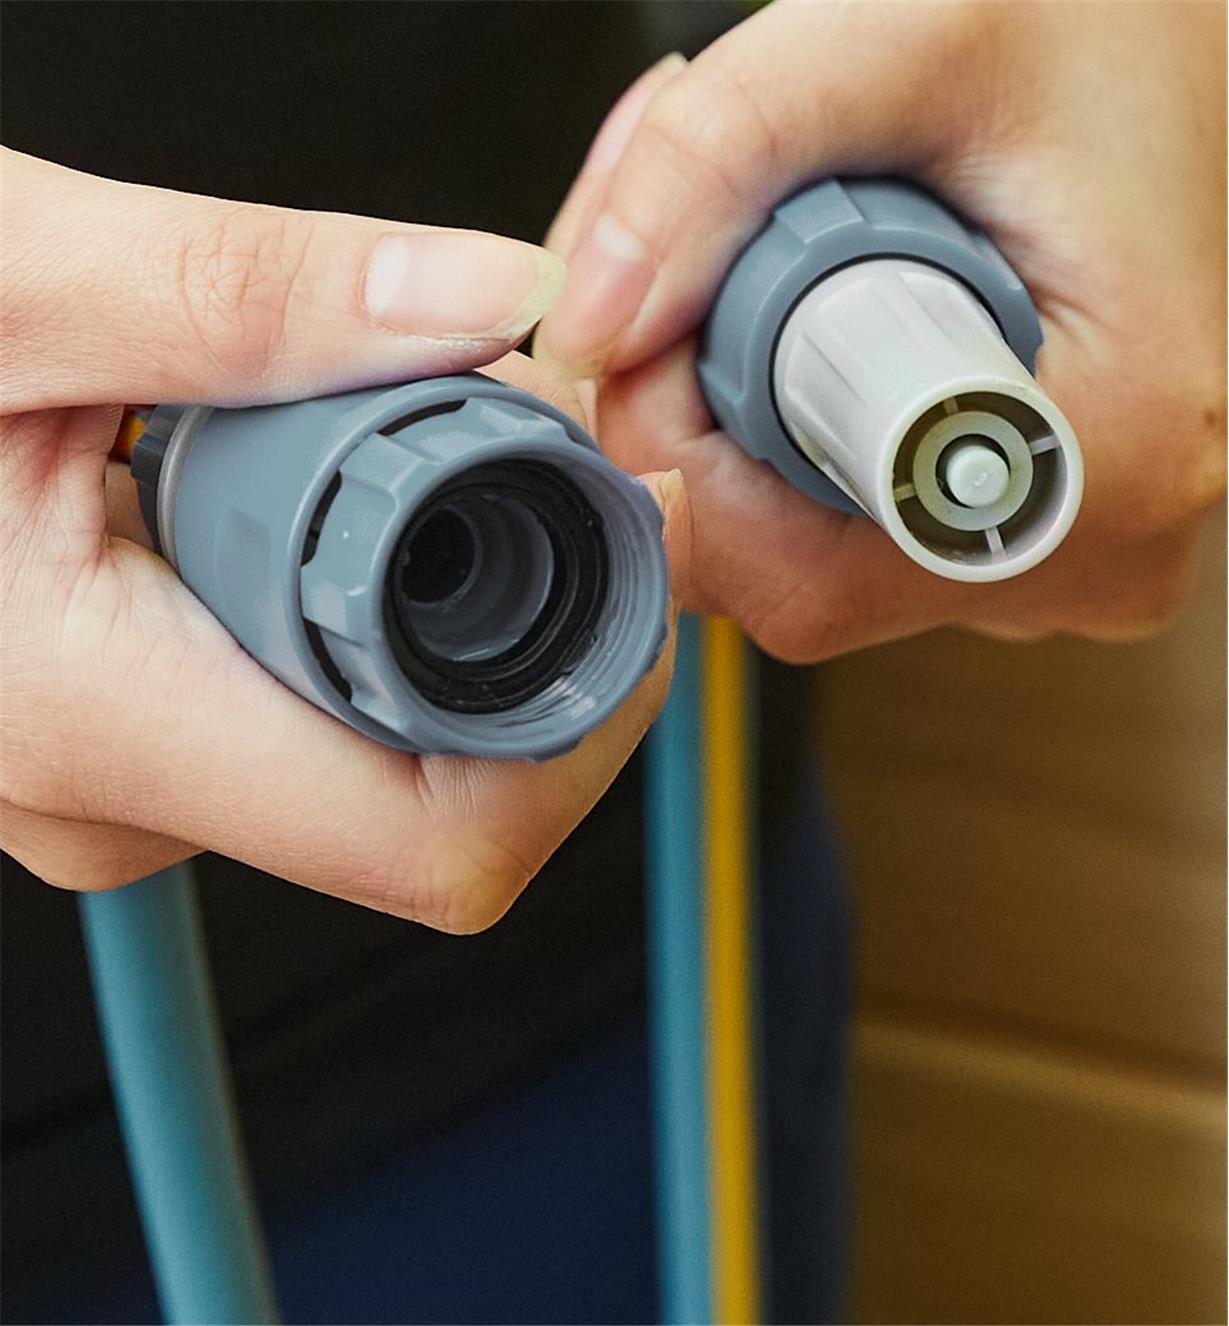 The hose’s spray gun is held in one hand and the connector end in the other hand